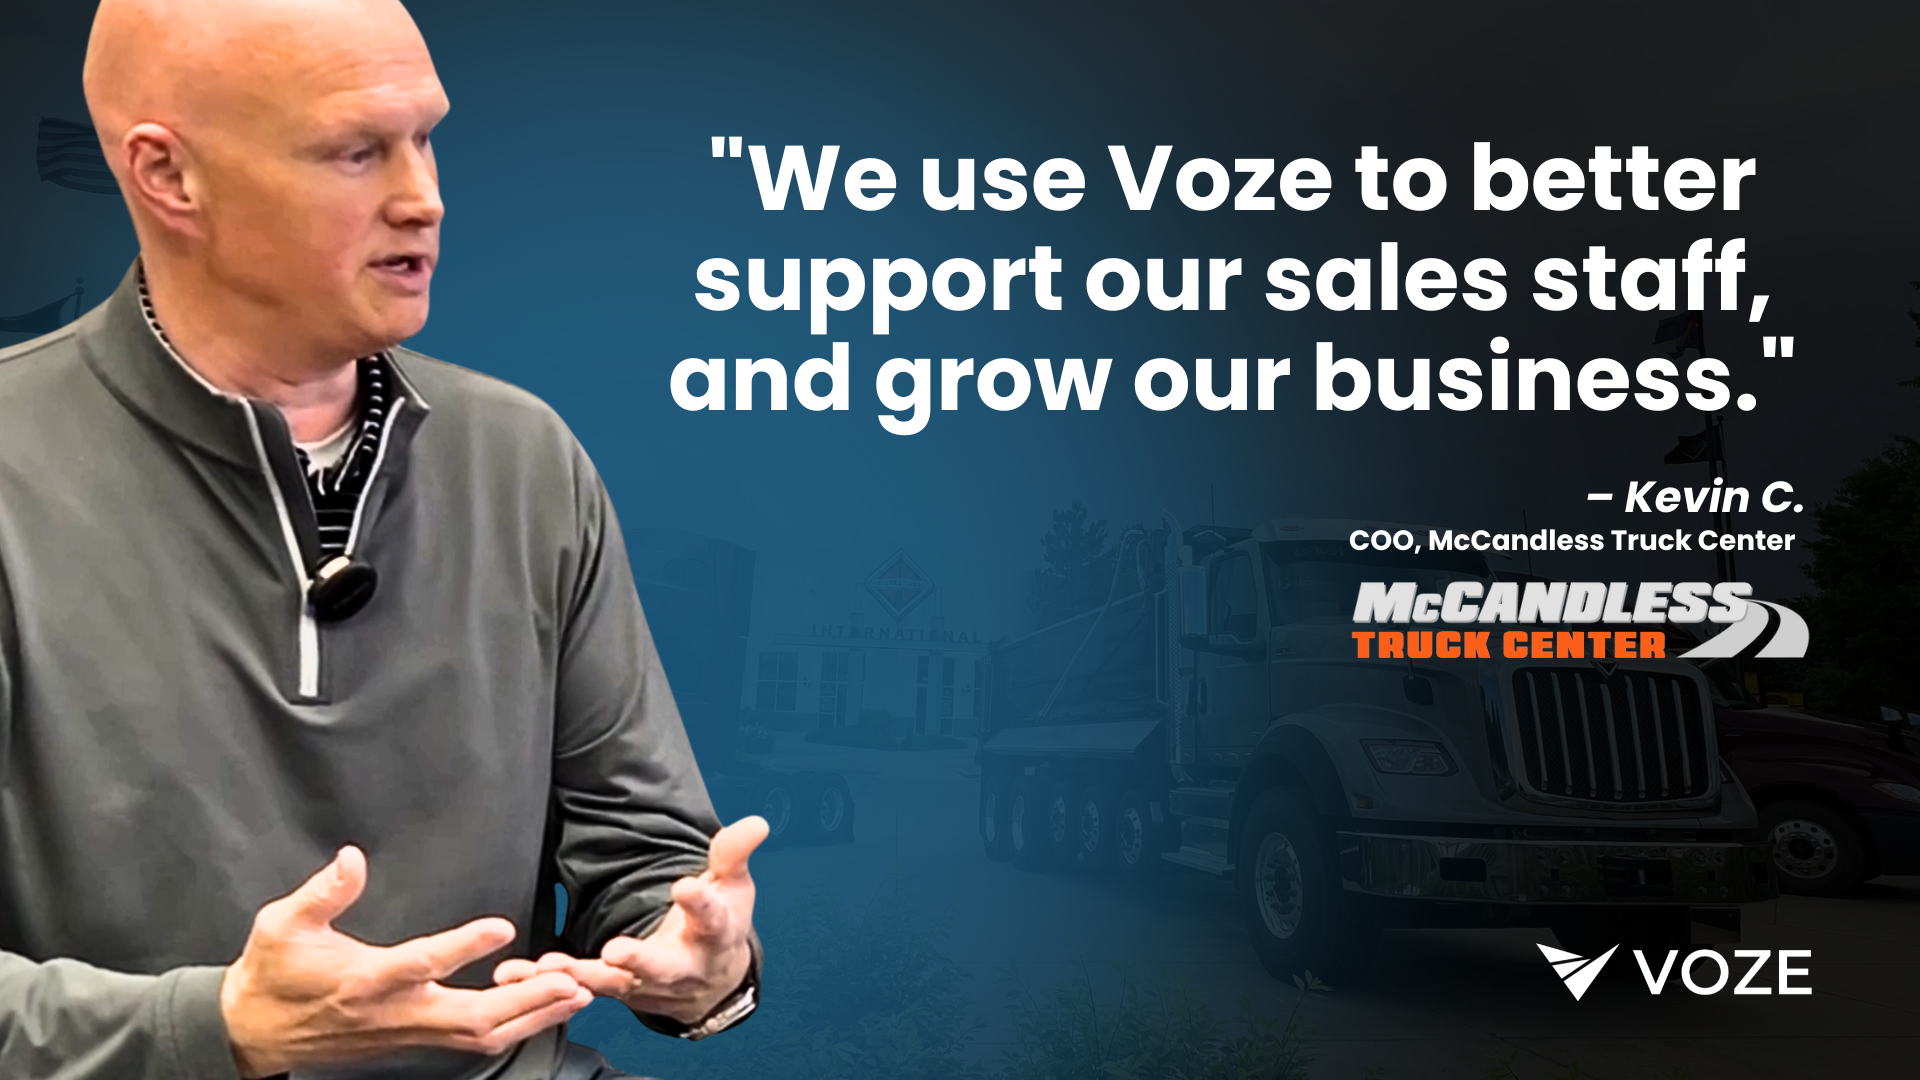 How McCandless Truck Center Gains More Visibility With Their Sales Reps In The Field